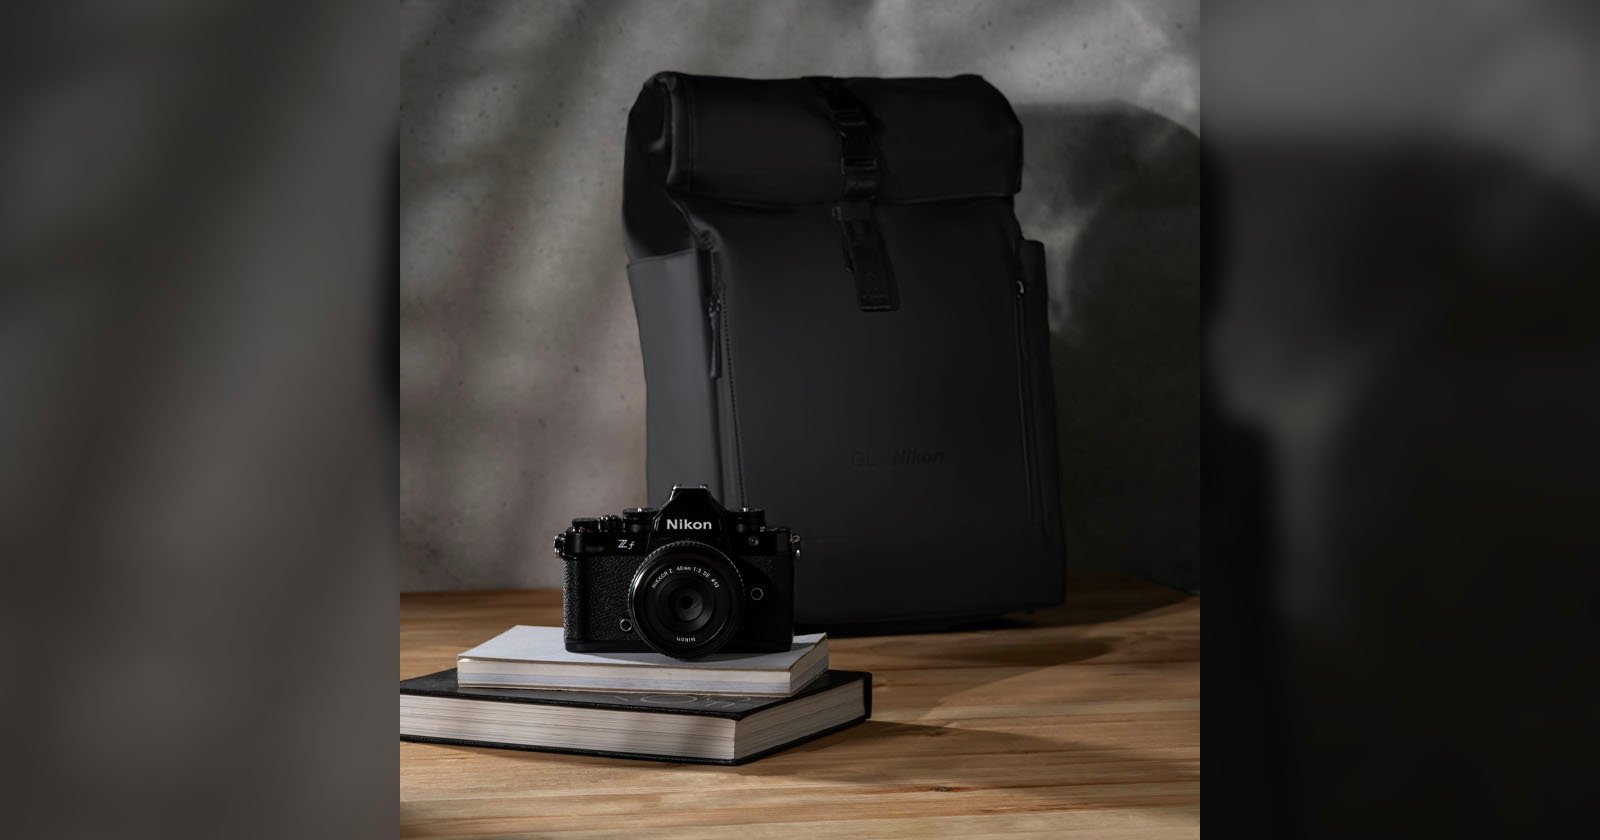 Nikon Announced a Gorgeous New Backpack, But There’s a Catch